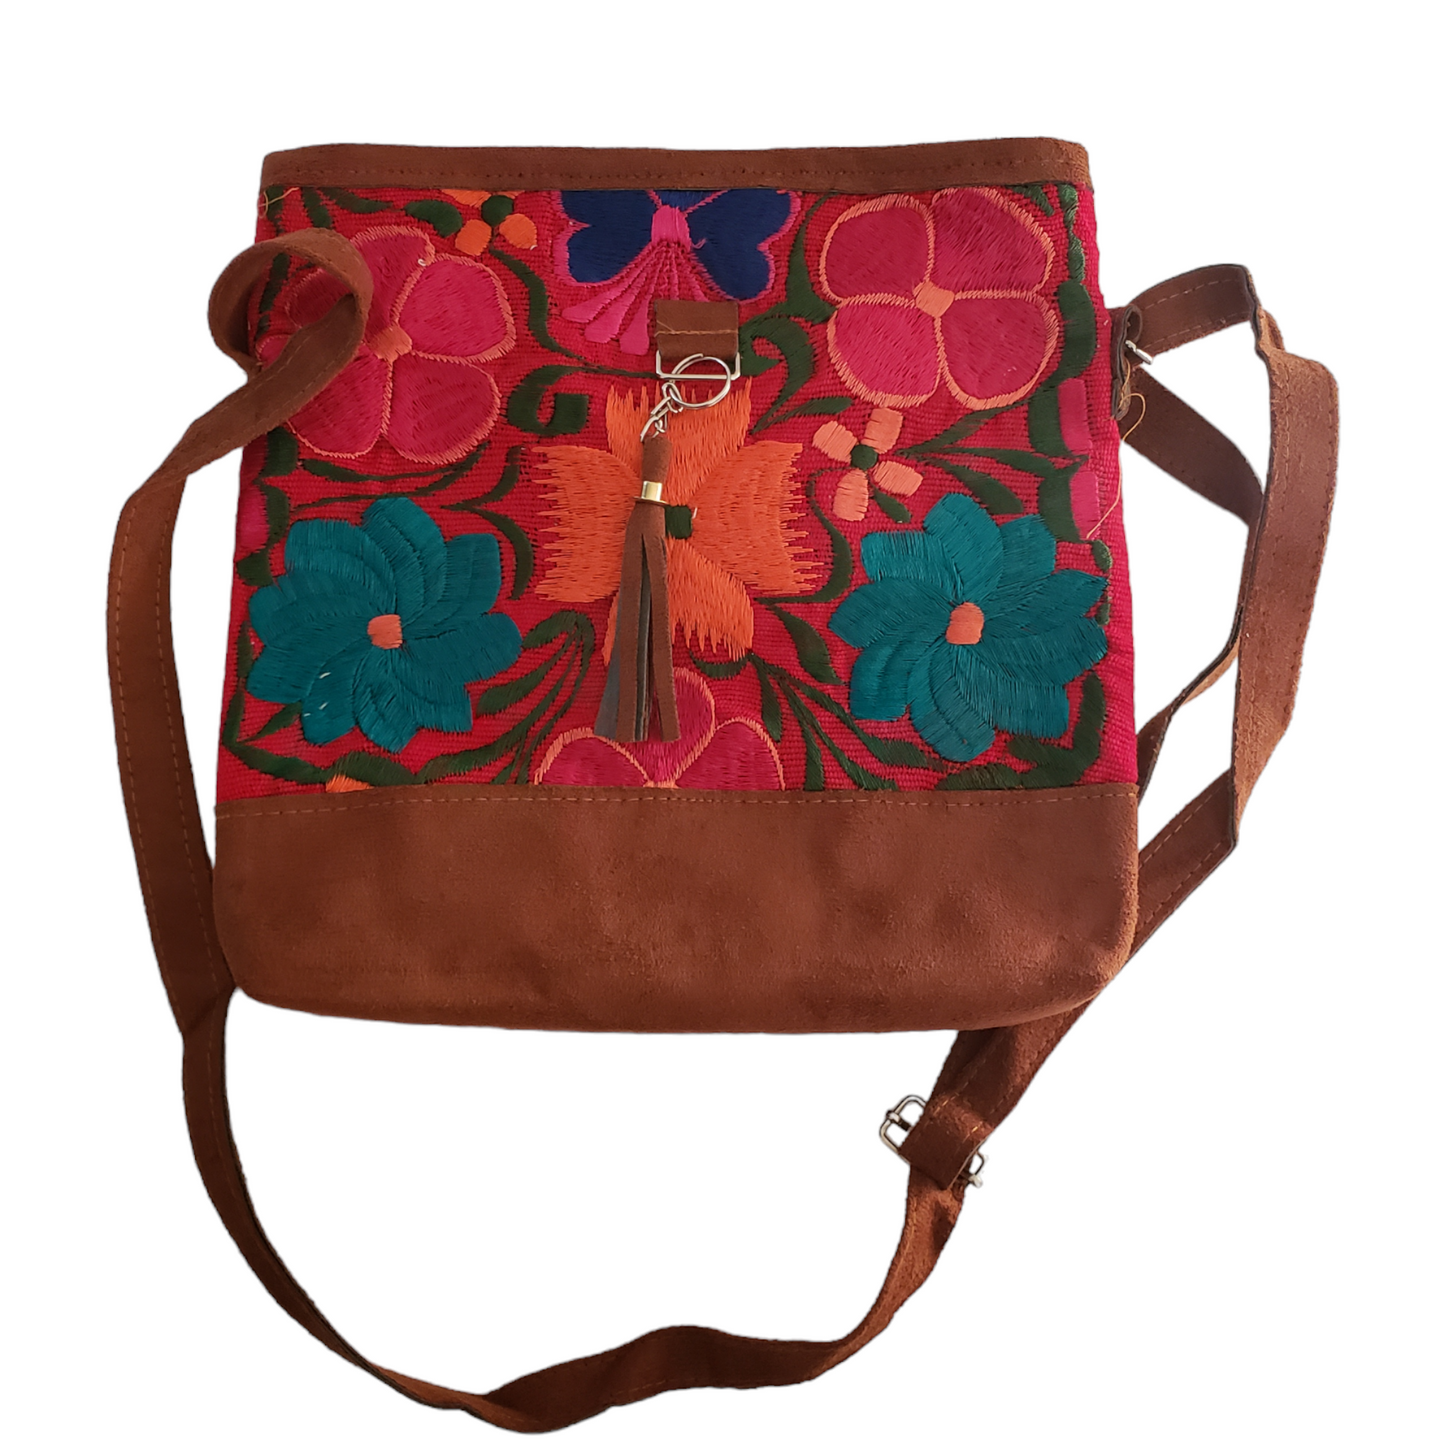 Colorful Mexican Embroidered Floral Purse Shoulder Crossbody